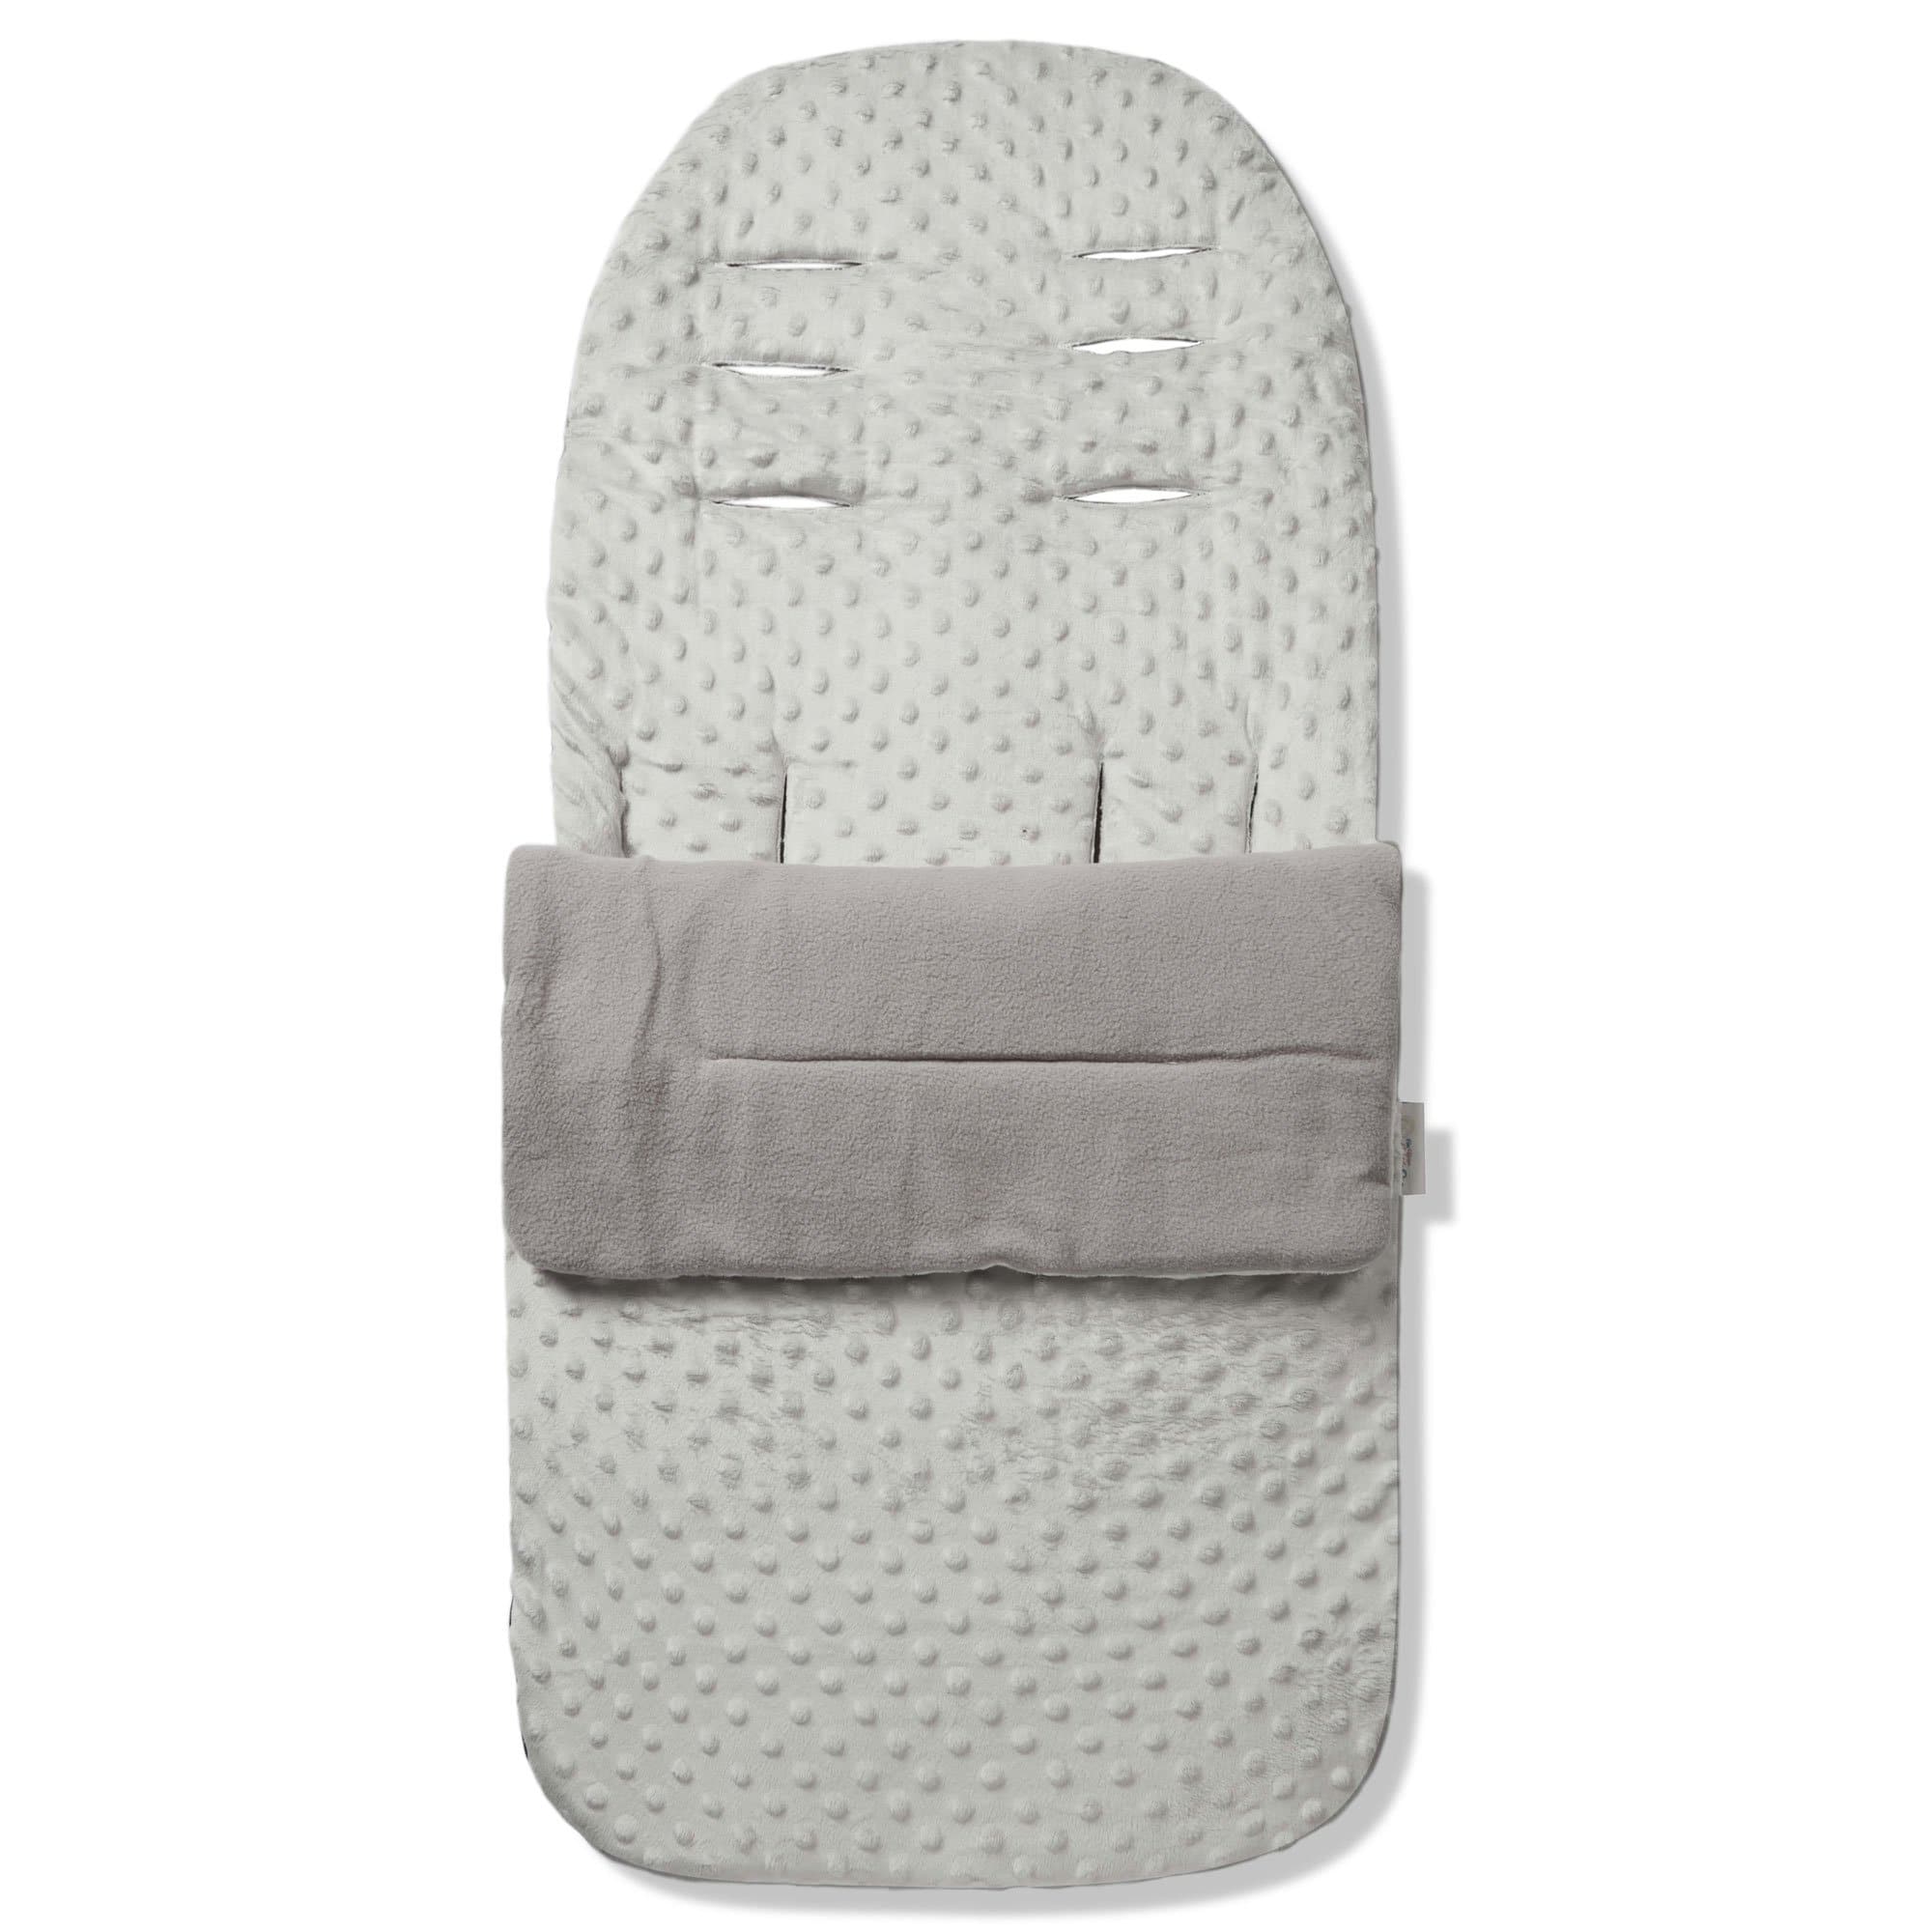 Dimple Footmuff / Cosy Toes Compatible with Quinny - Grey / Fits All Models | For Your Little One